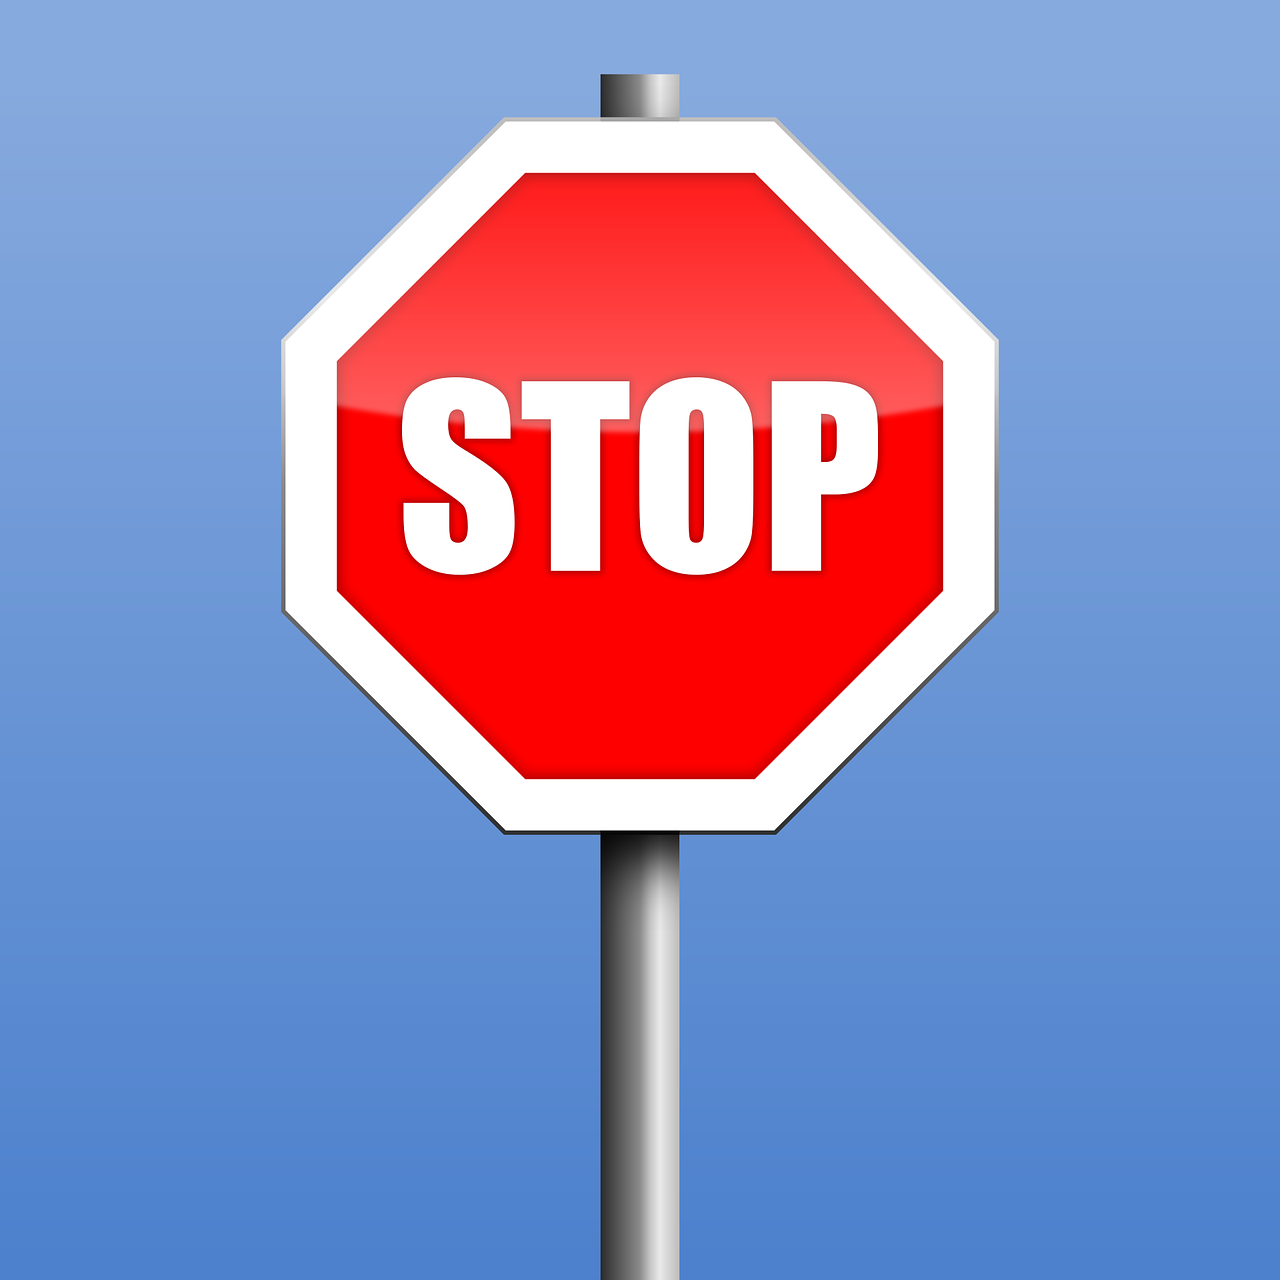 Stop G59ae7909f 1280